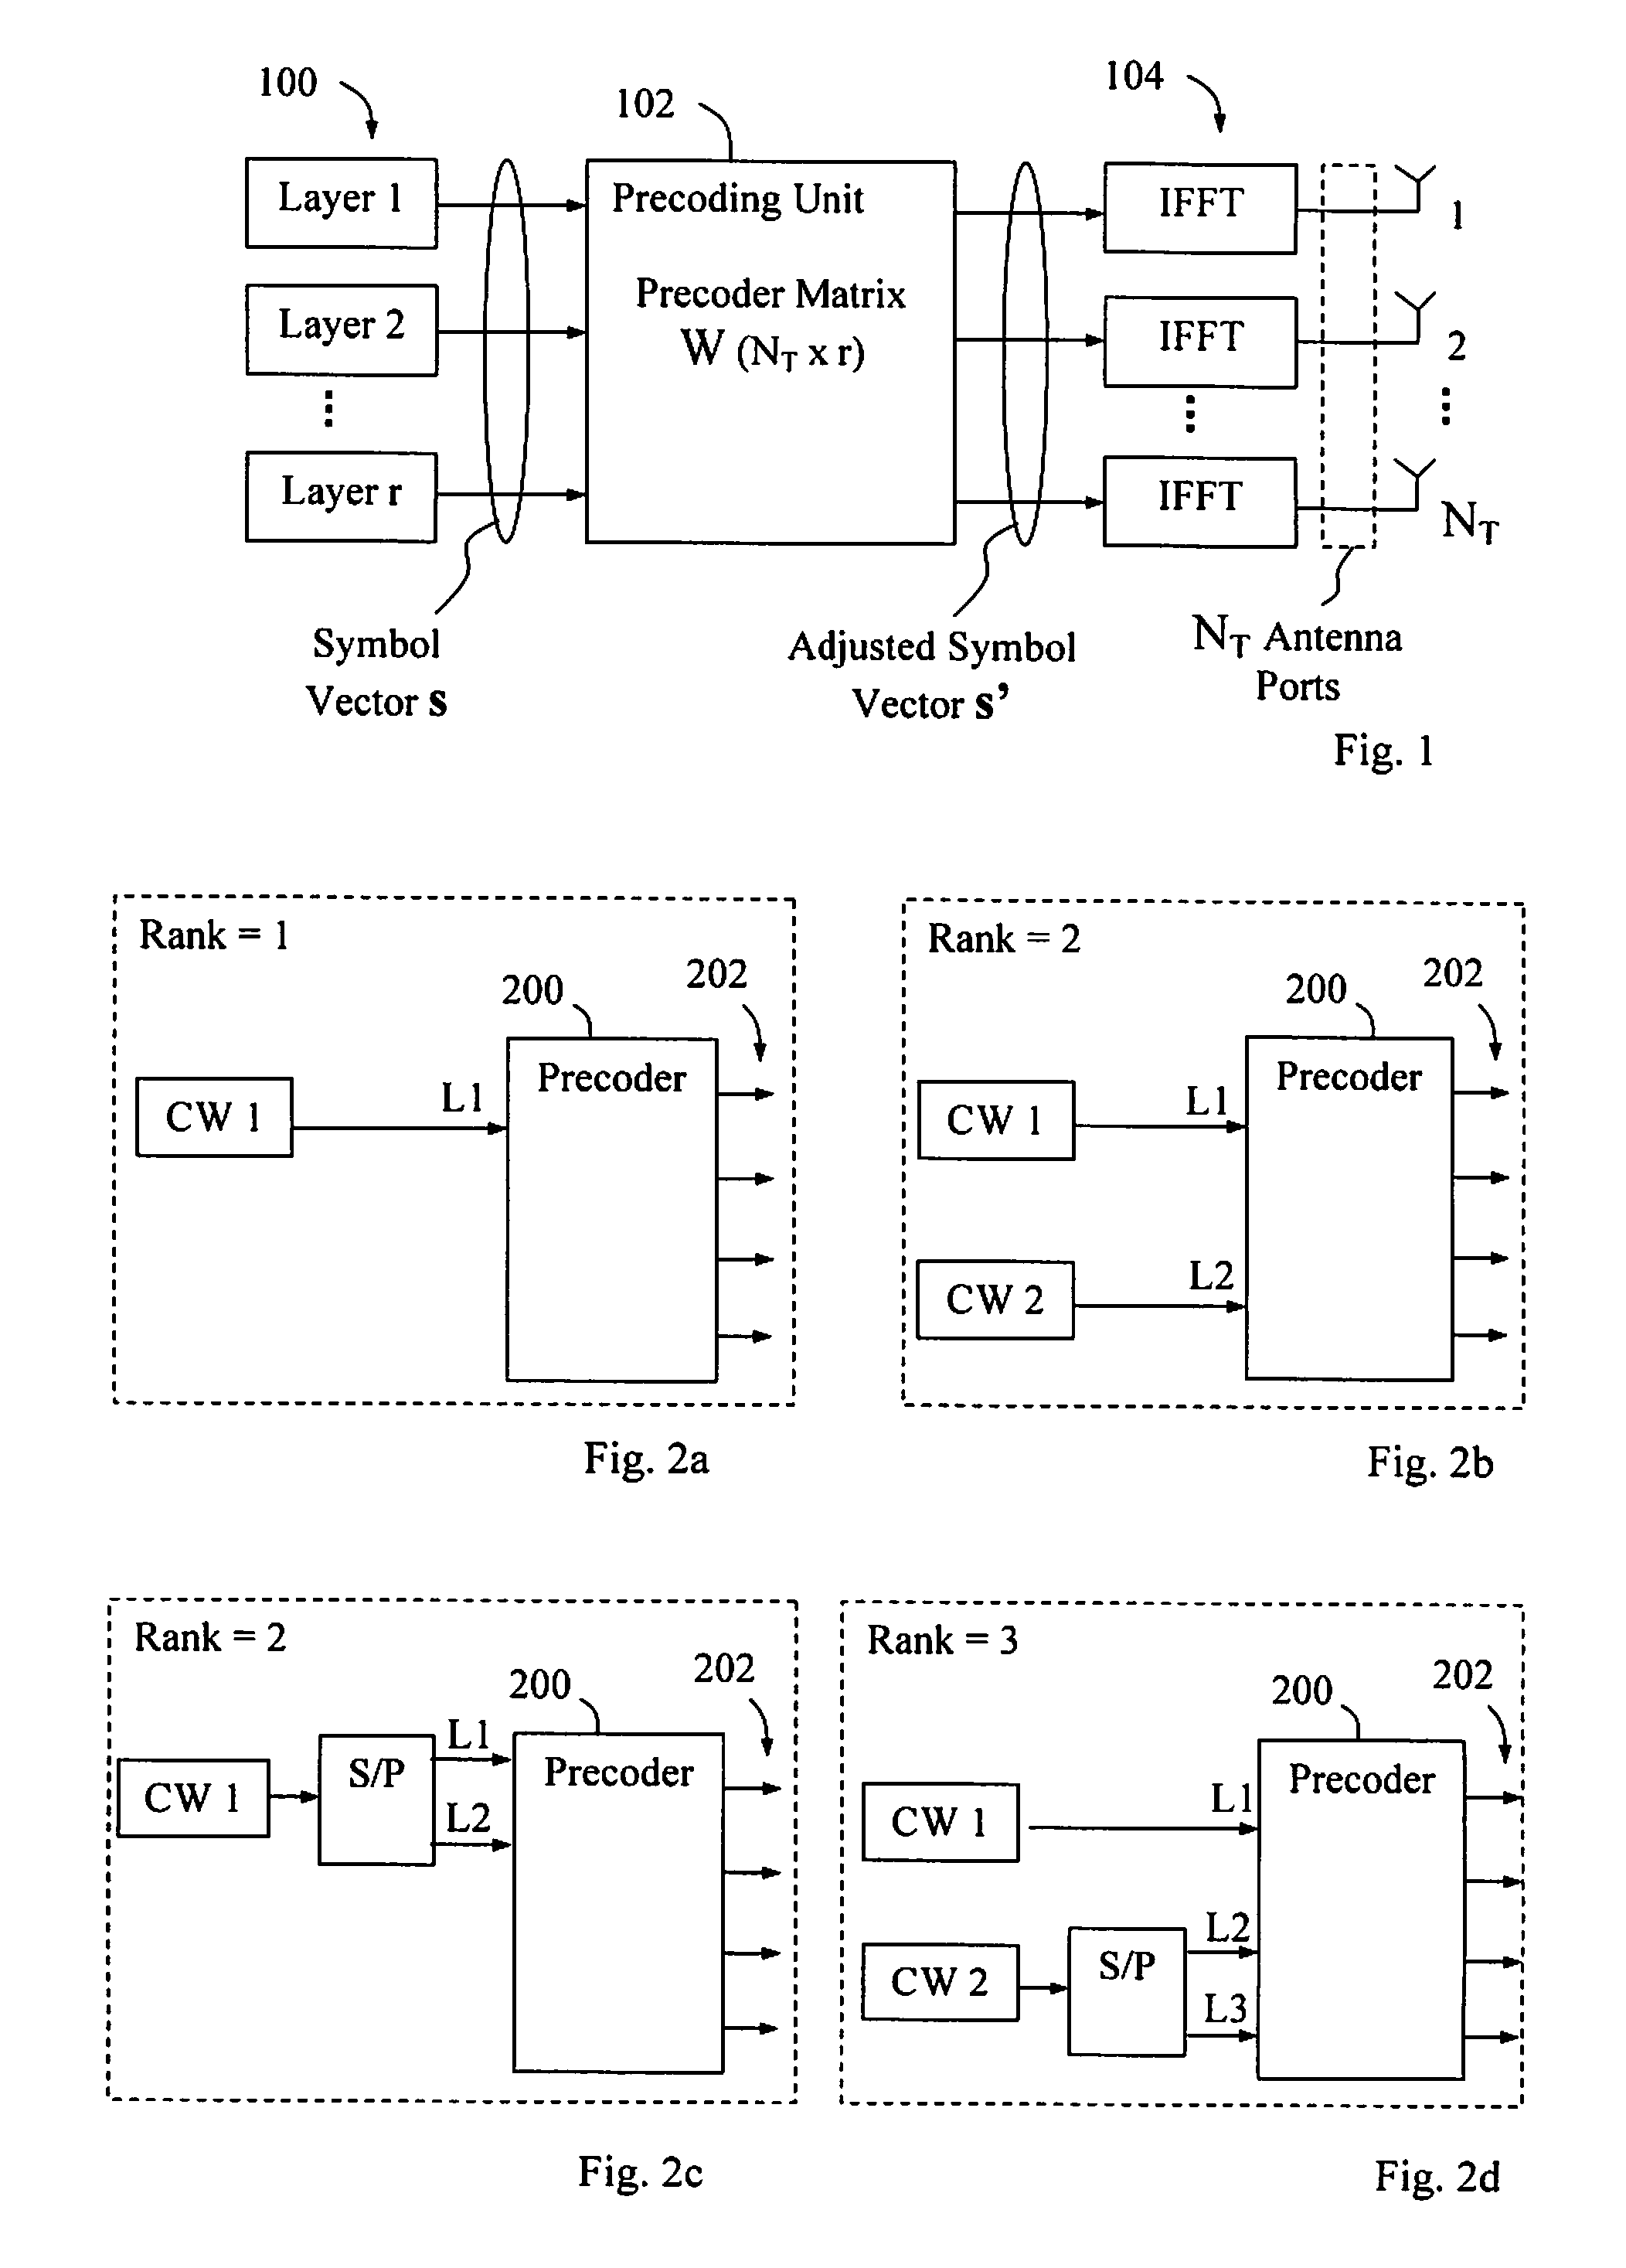 Method and Apparatus for Conveying Precoding Information in a MIMO System